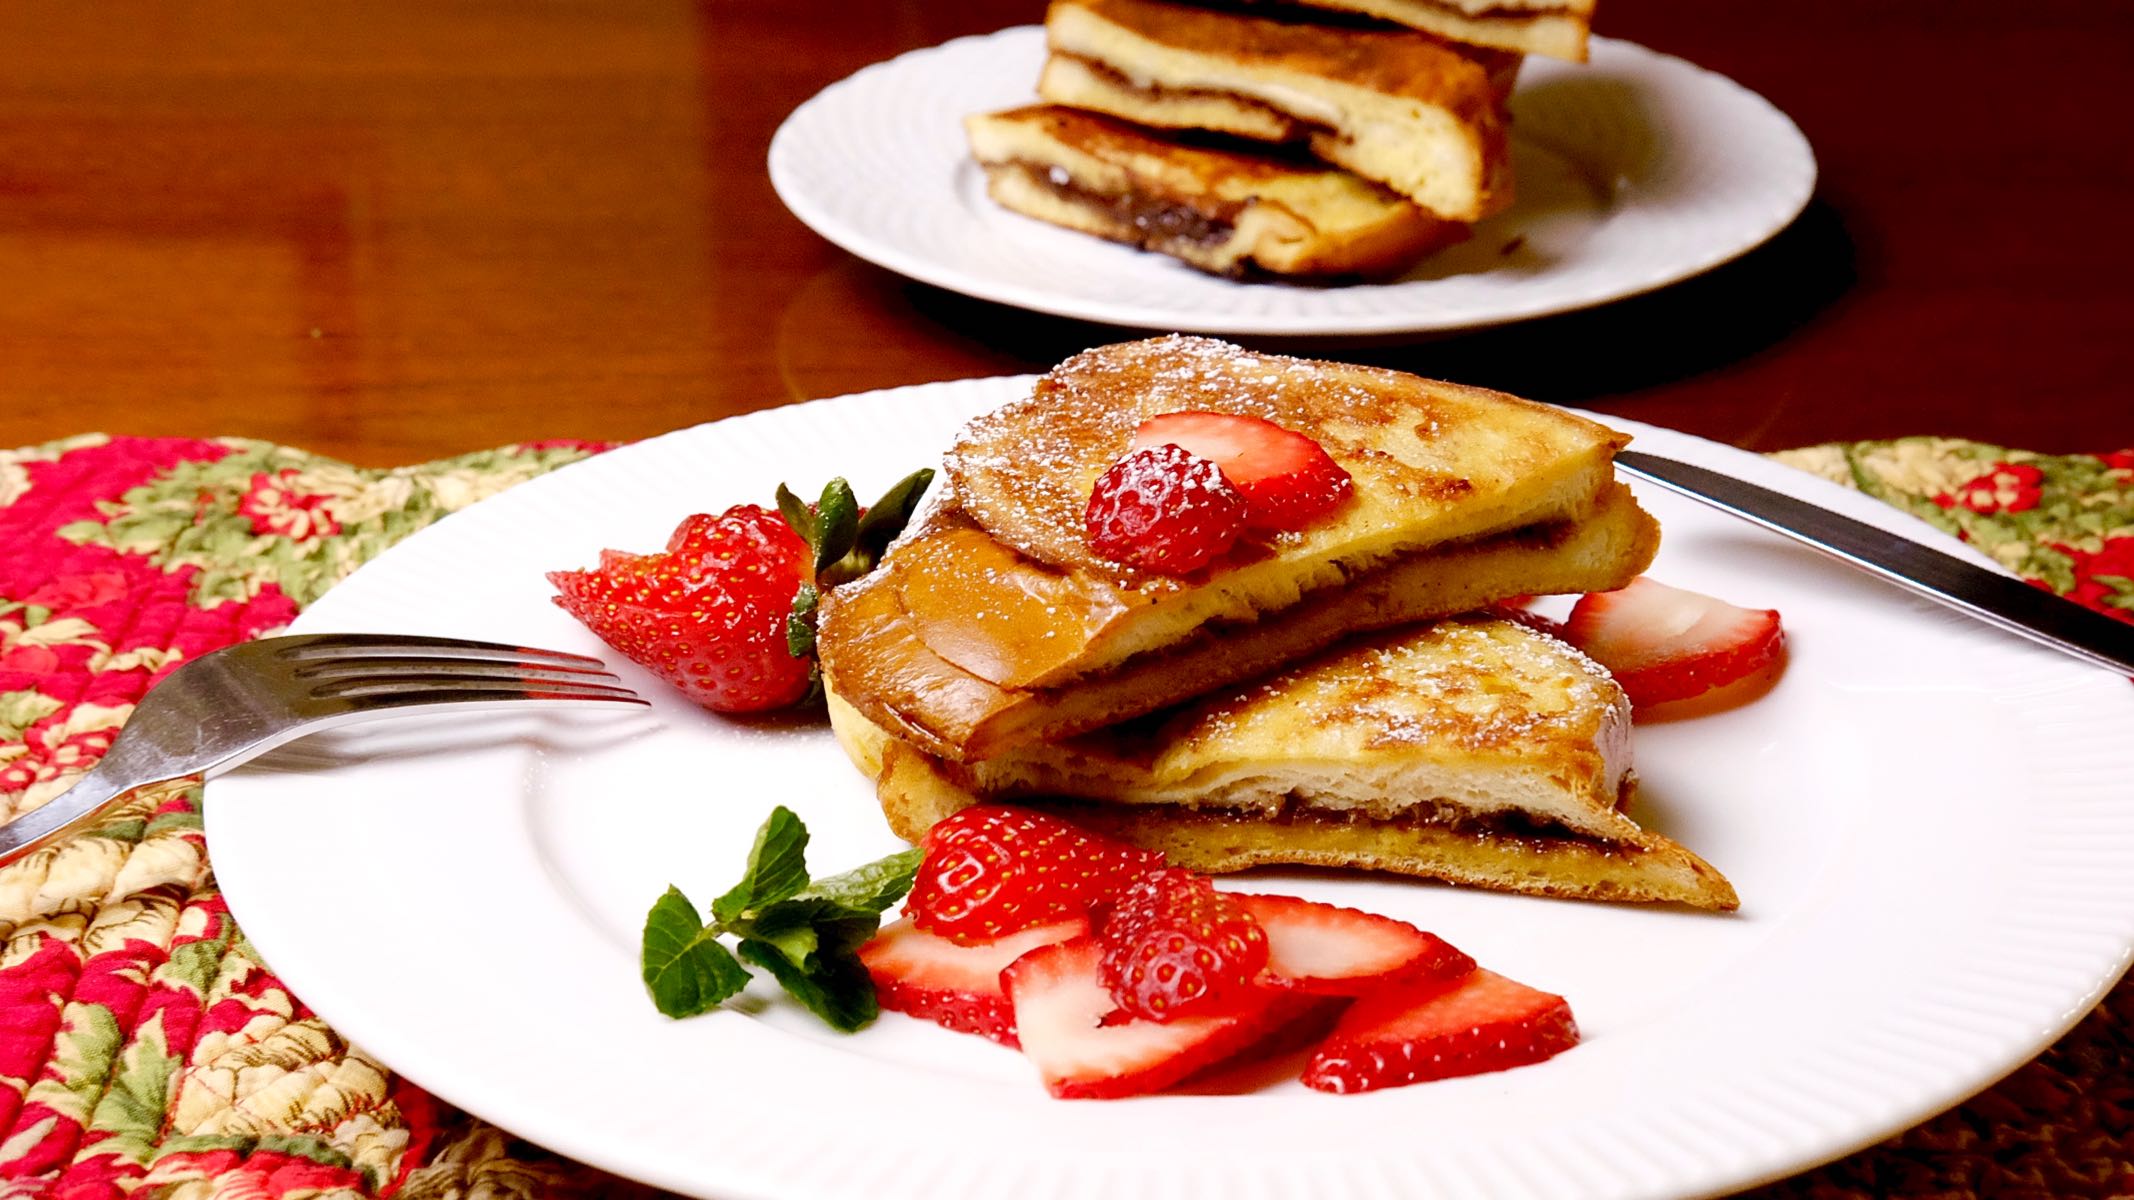 Nutella and Mascarpone Stuffed French toast on white plate garnished with sliced strawberries and stack of french toast in background